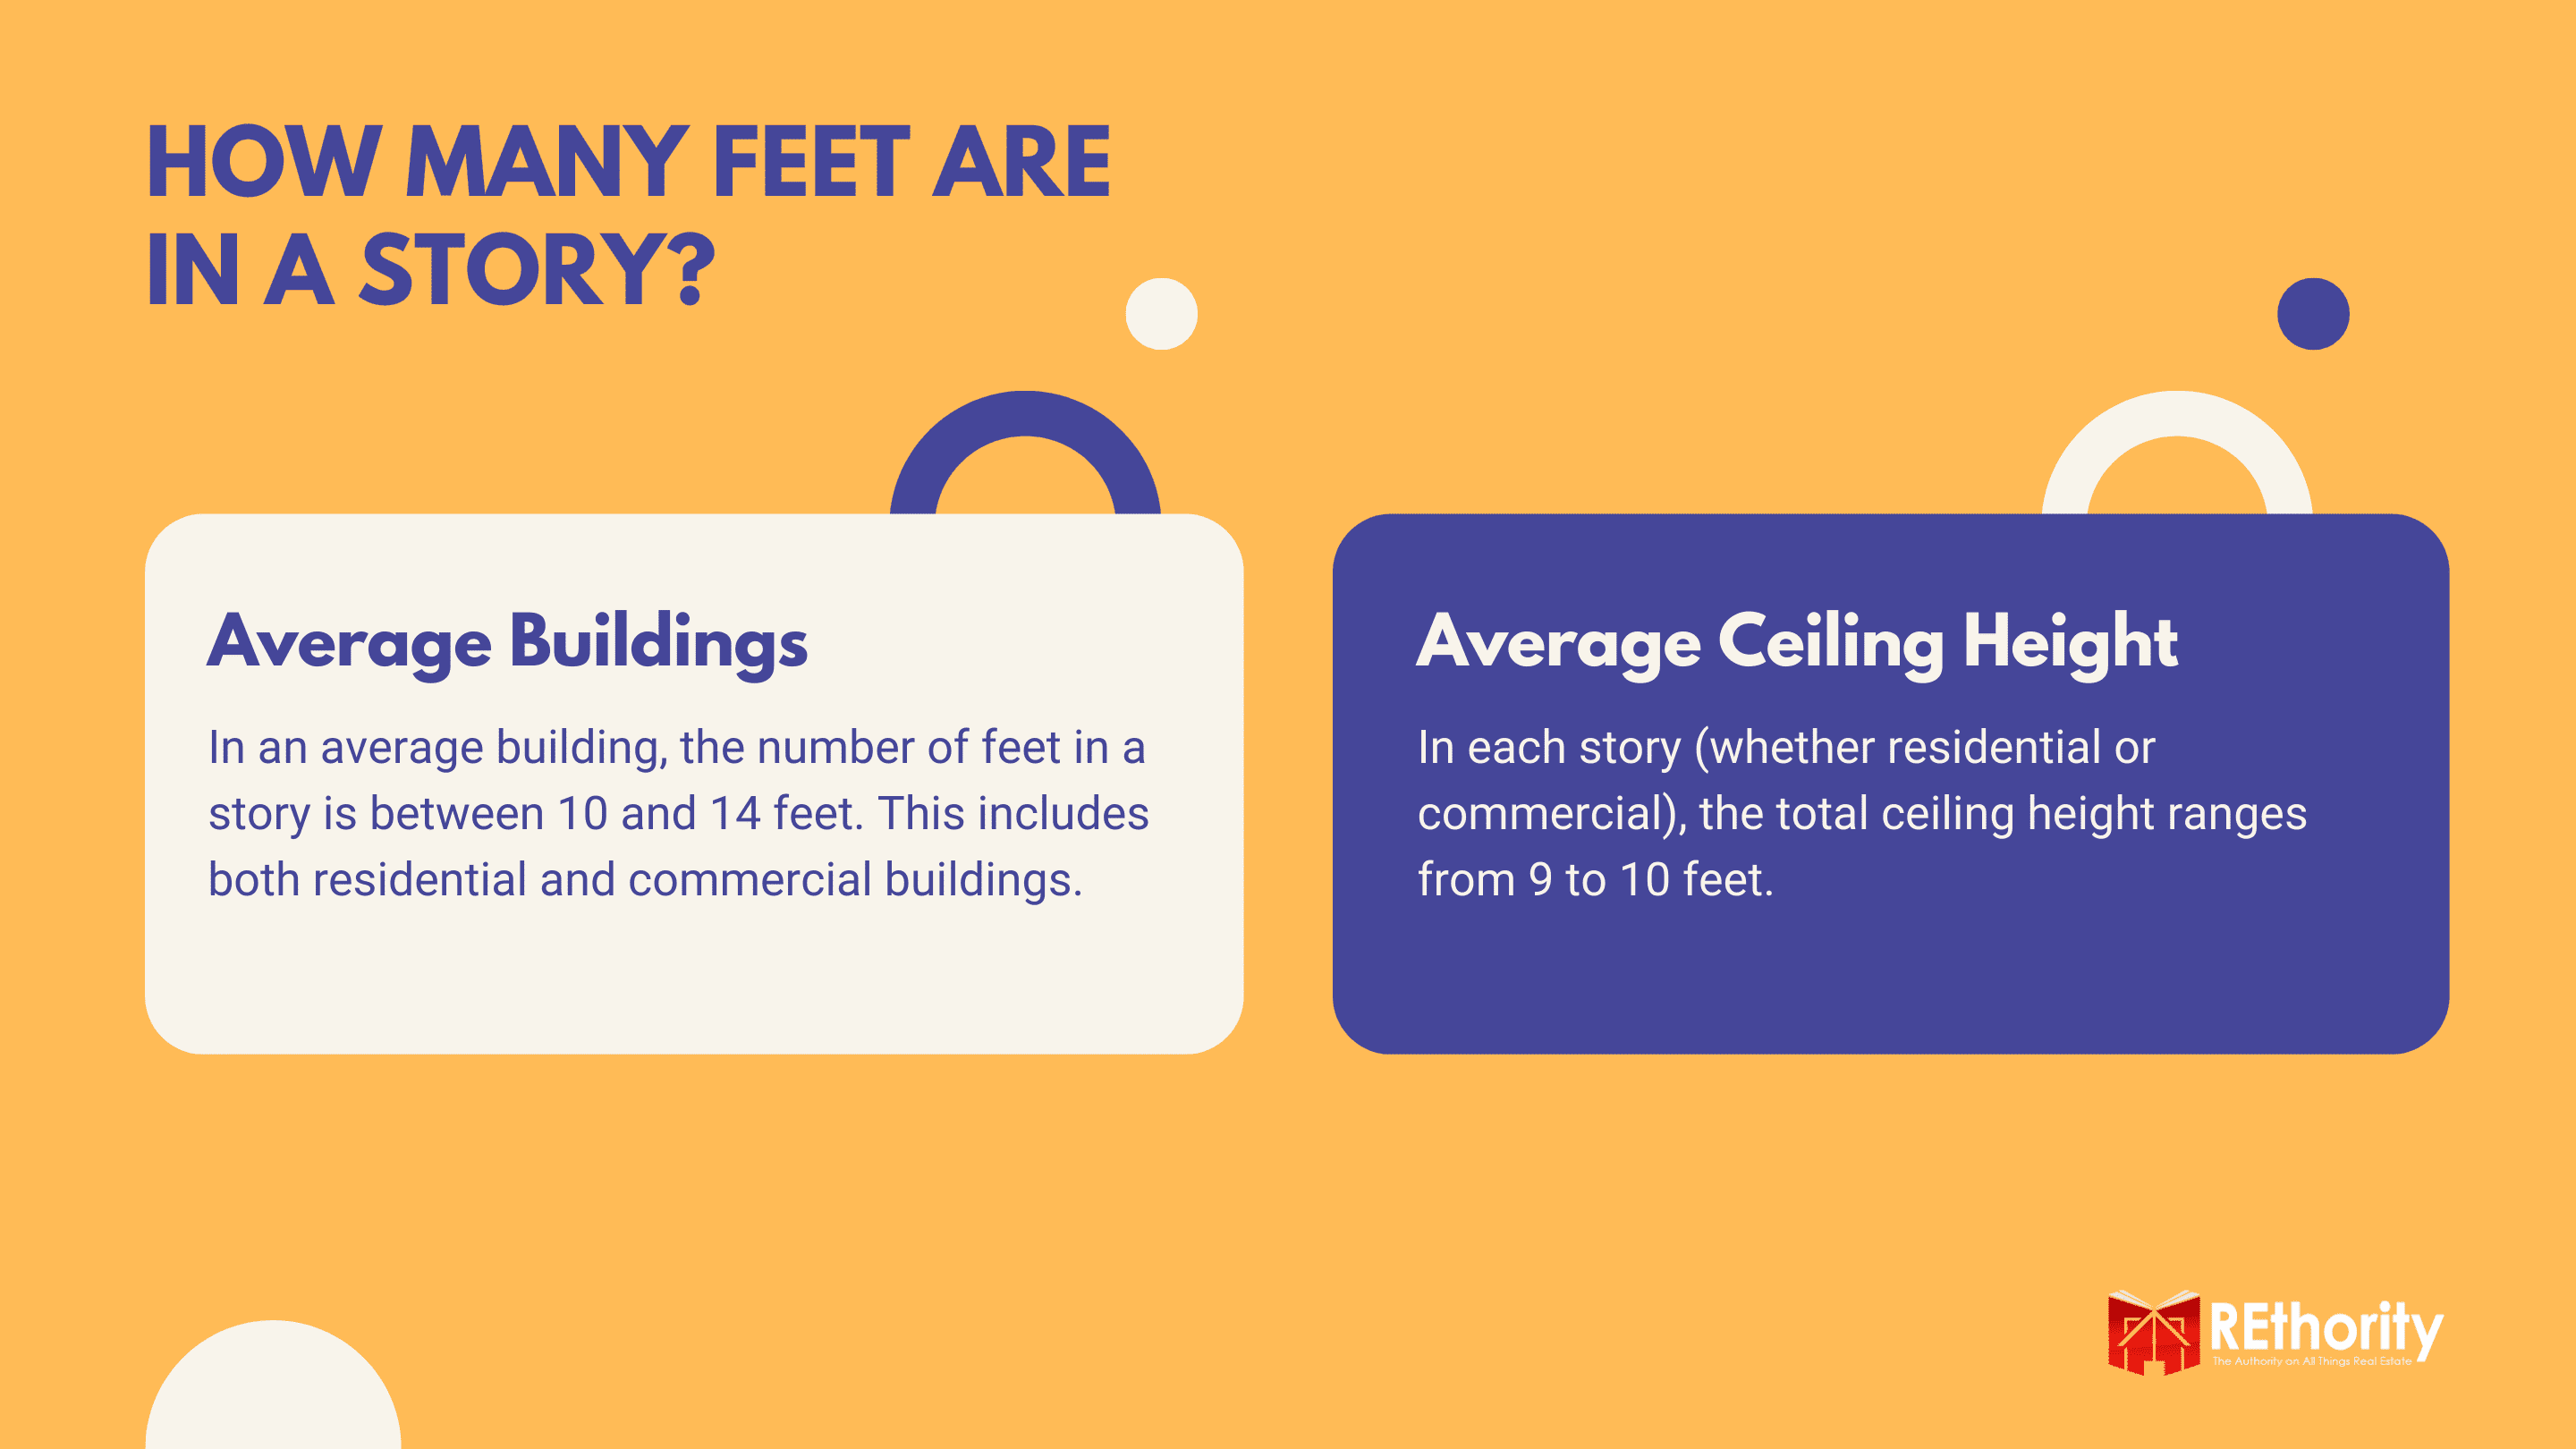 How Many Feet Are in a Story graphic